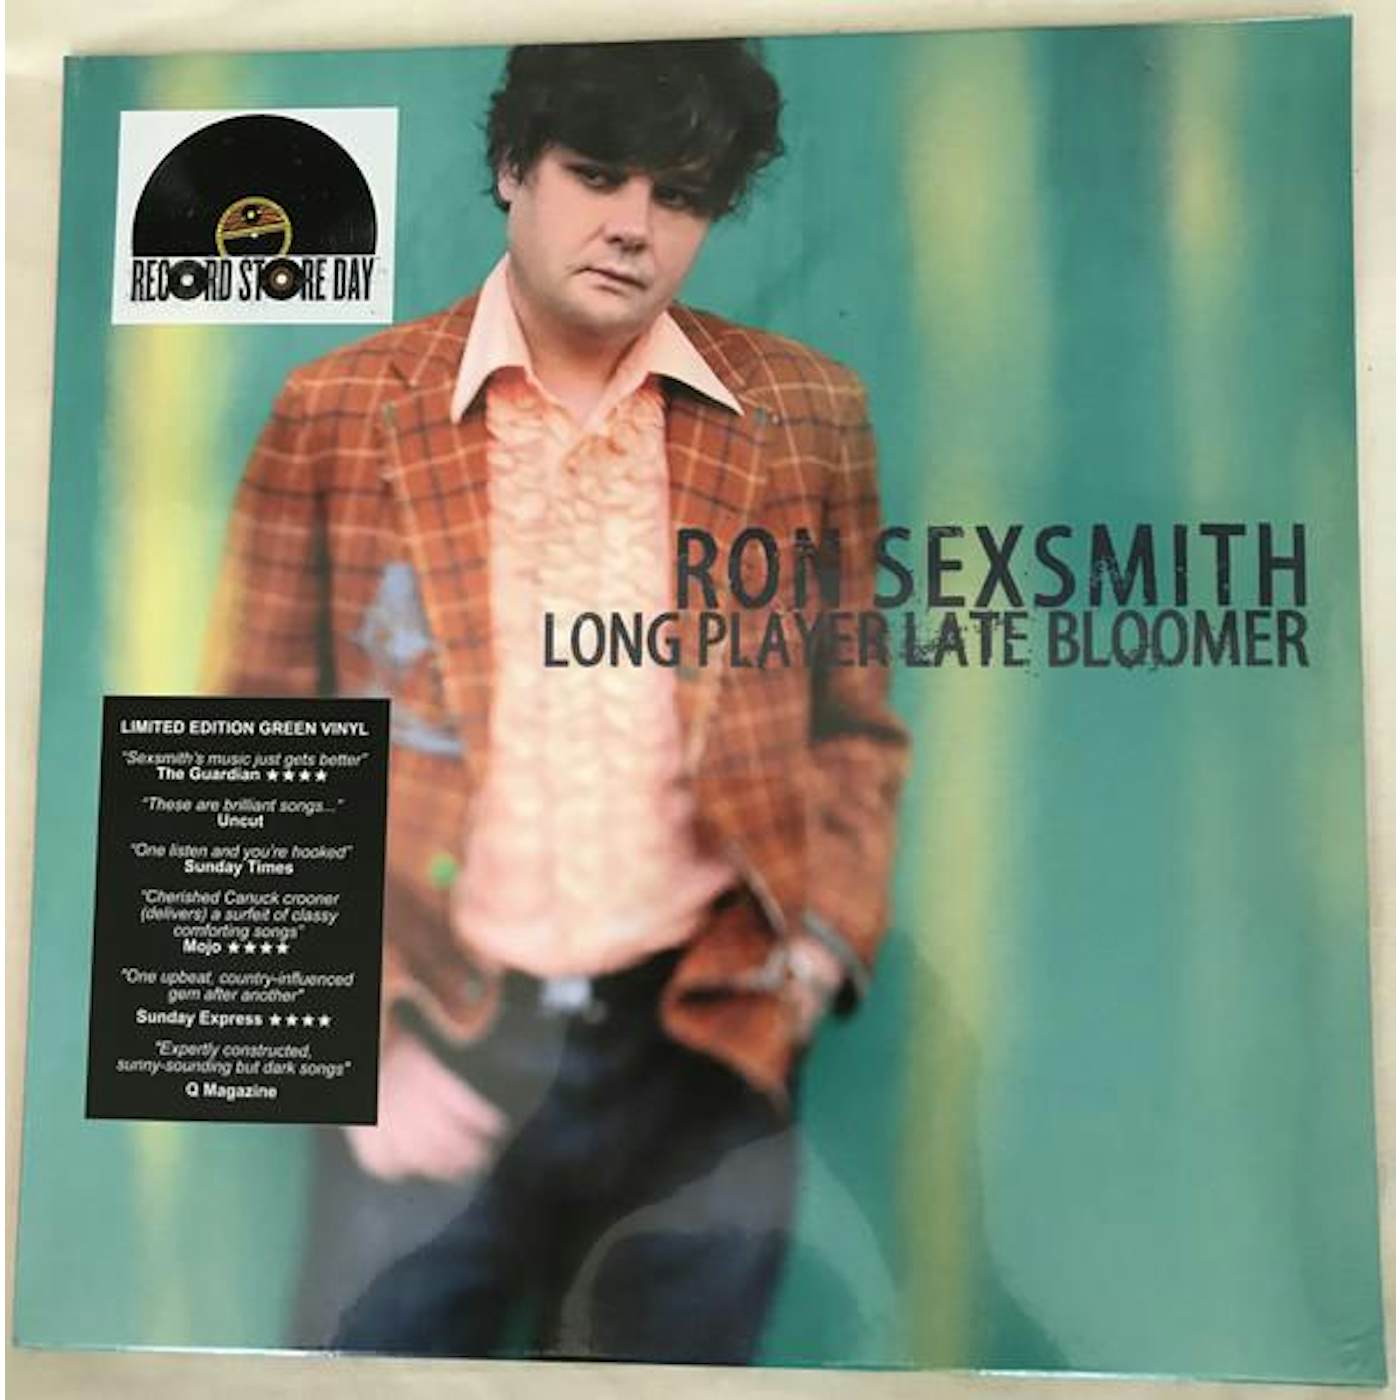 Ron Sexsmith Long Player Late Bloomer Vinyl Record